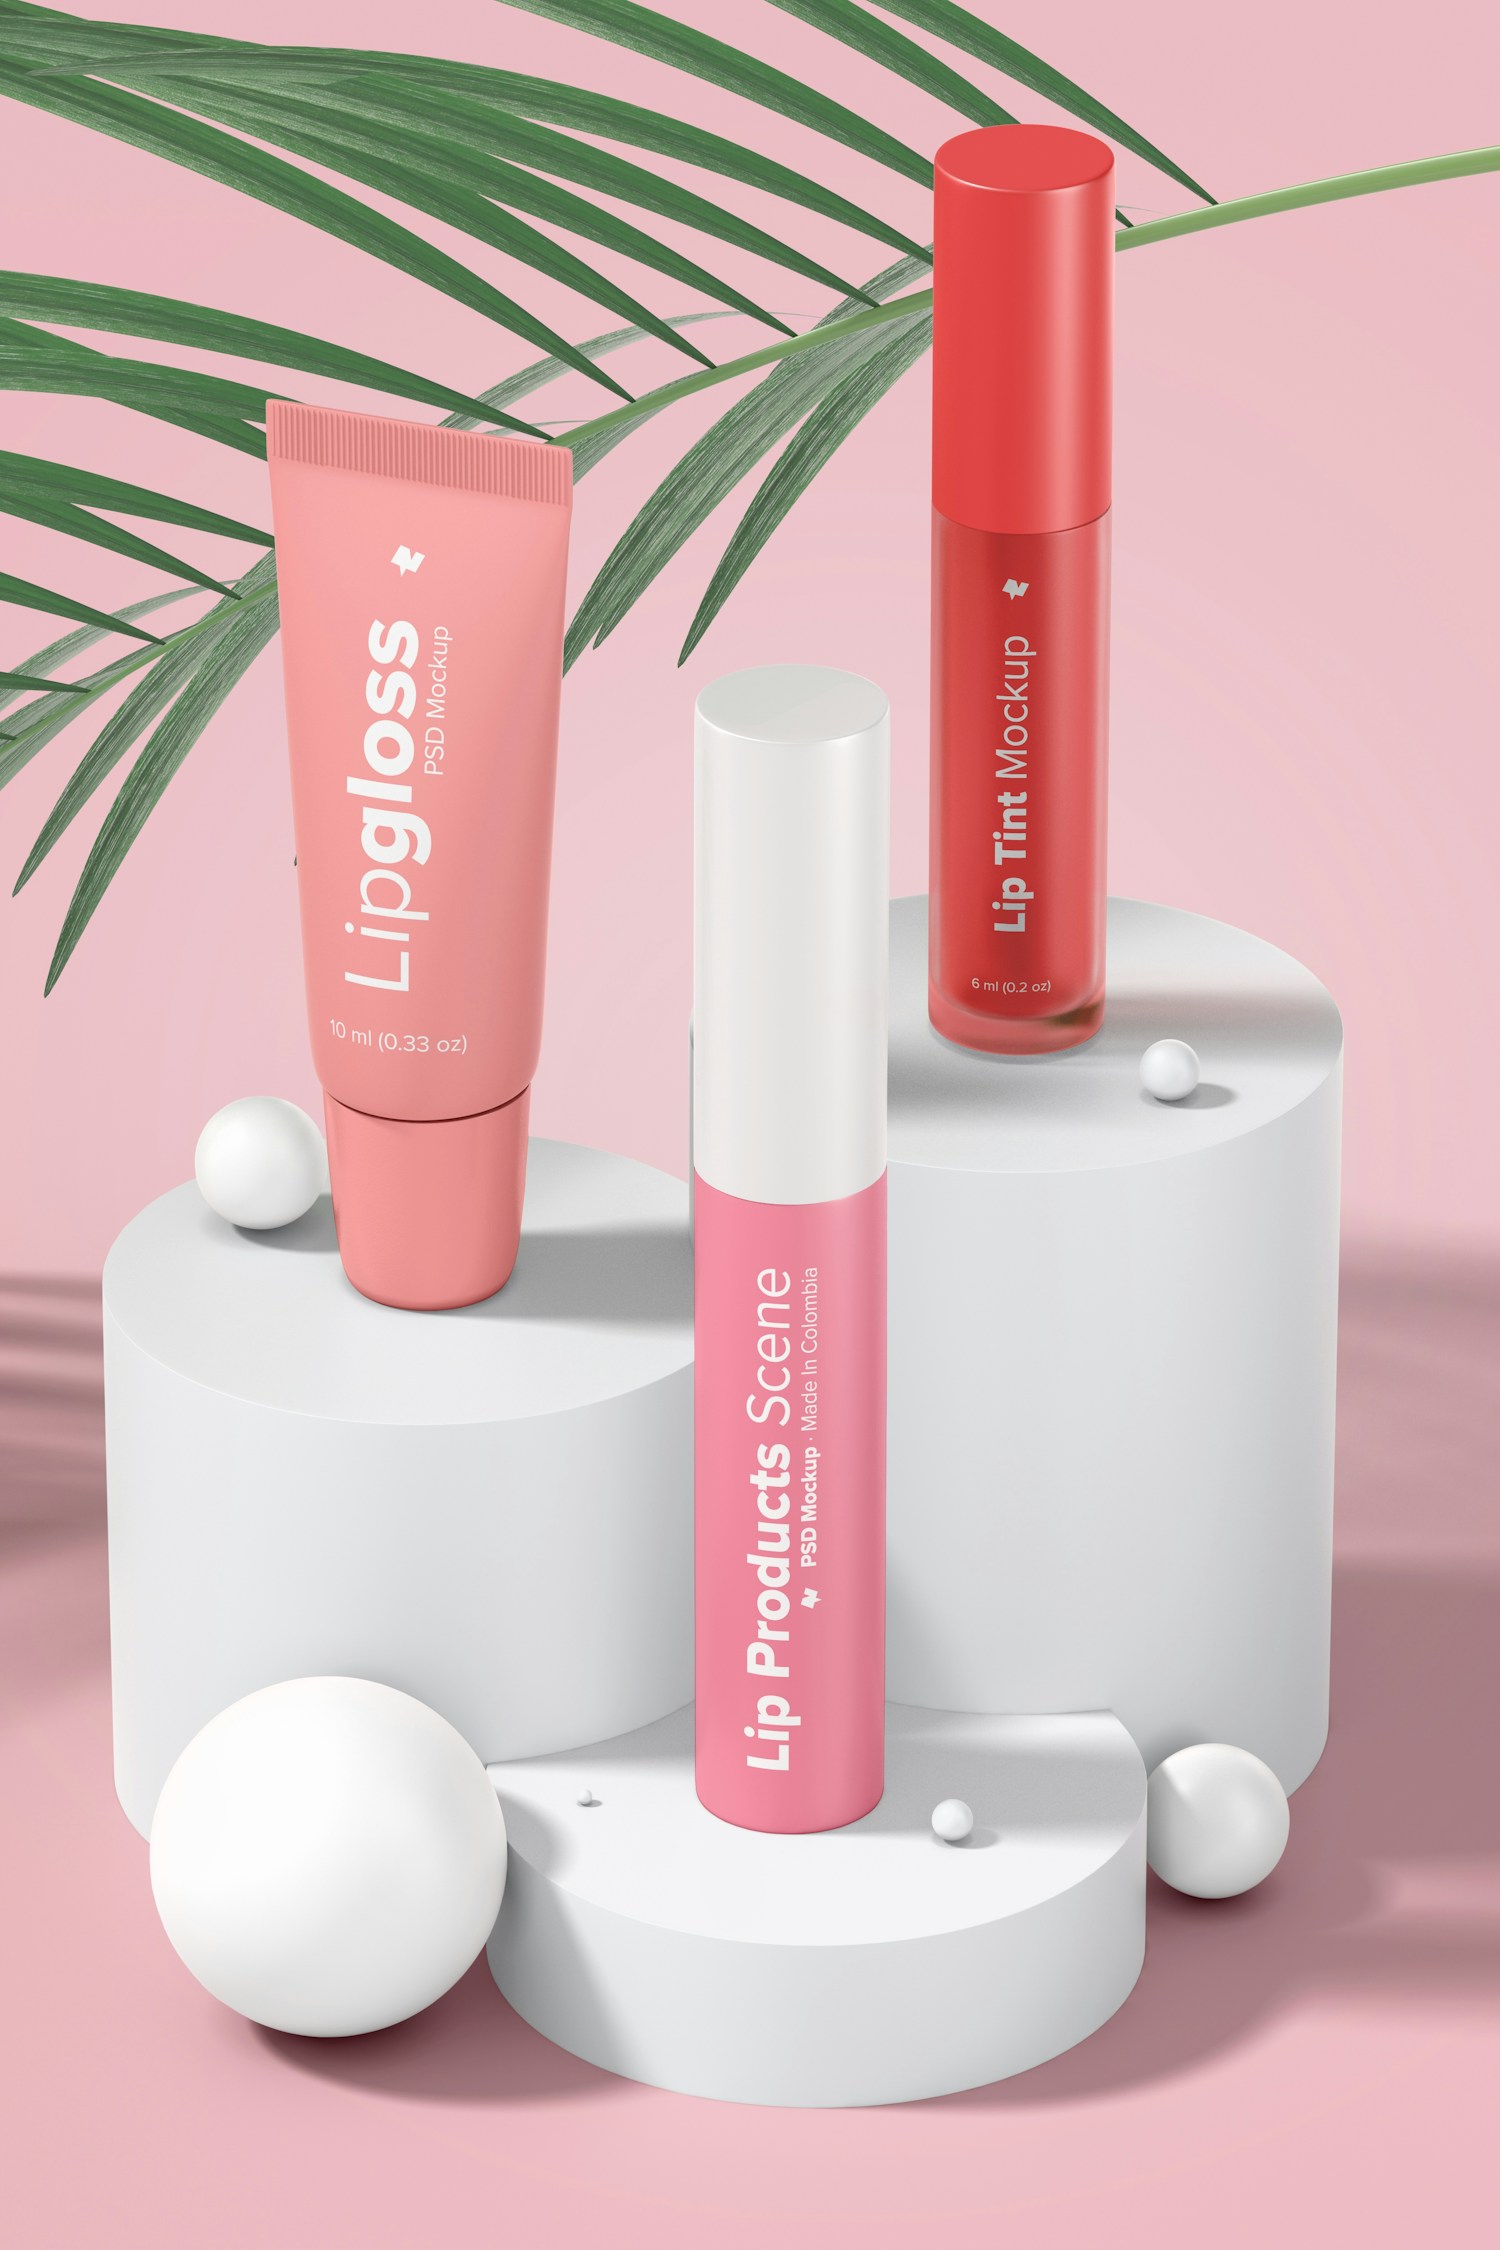 Lip Products Scene Mockup, Perspective View 02